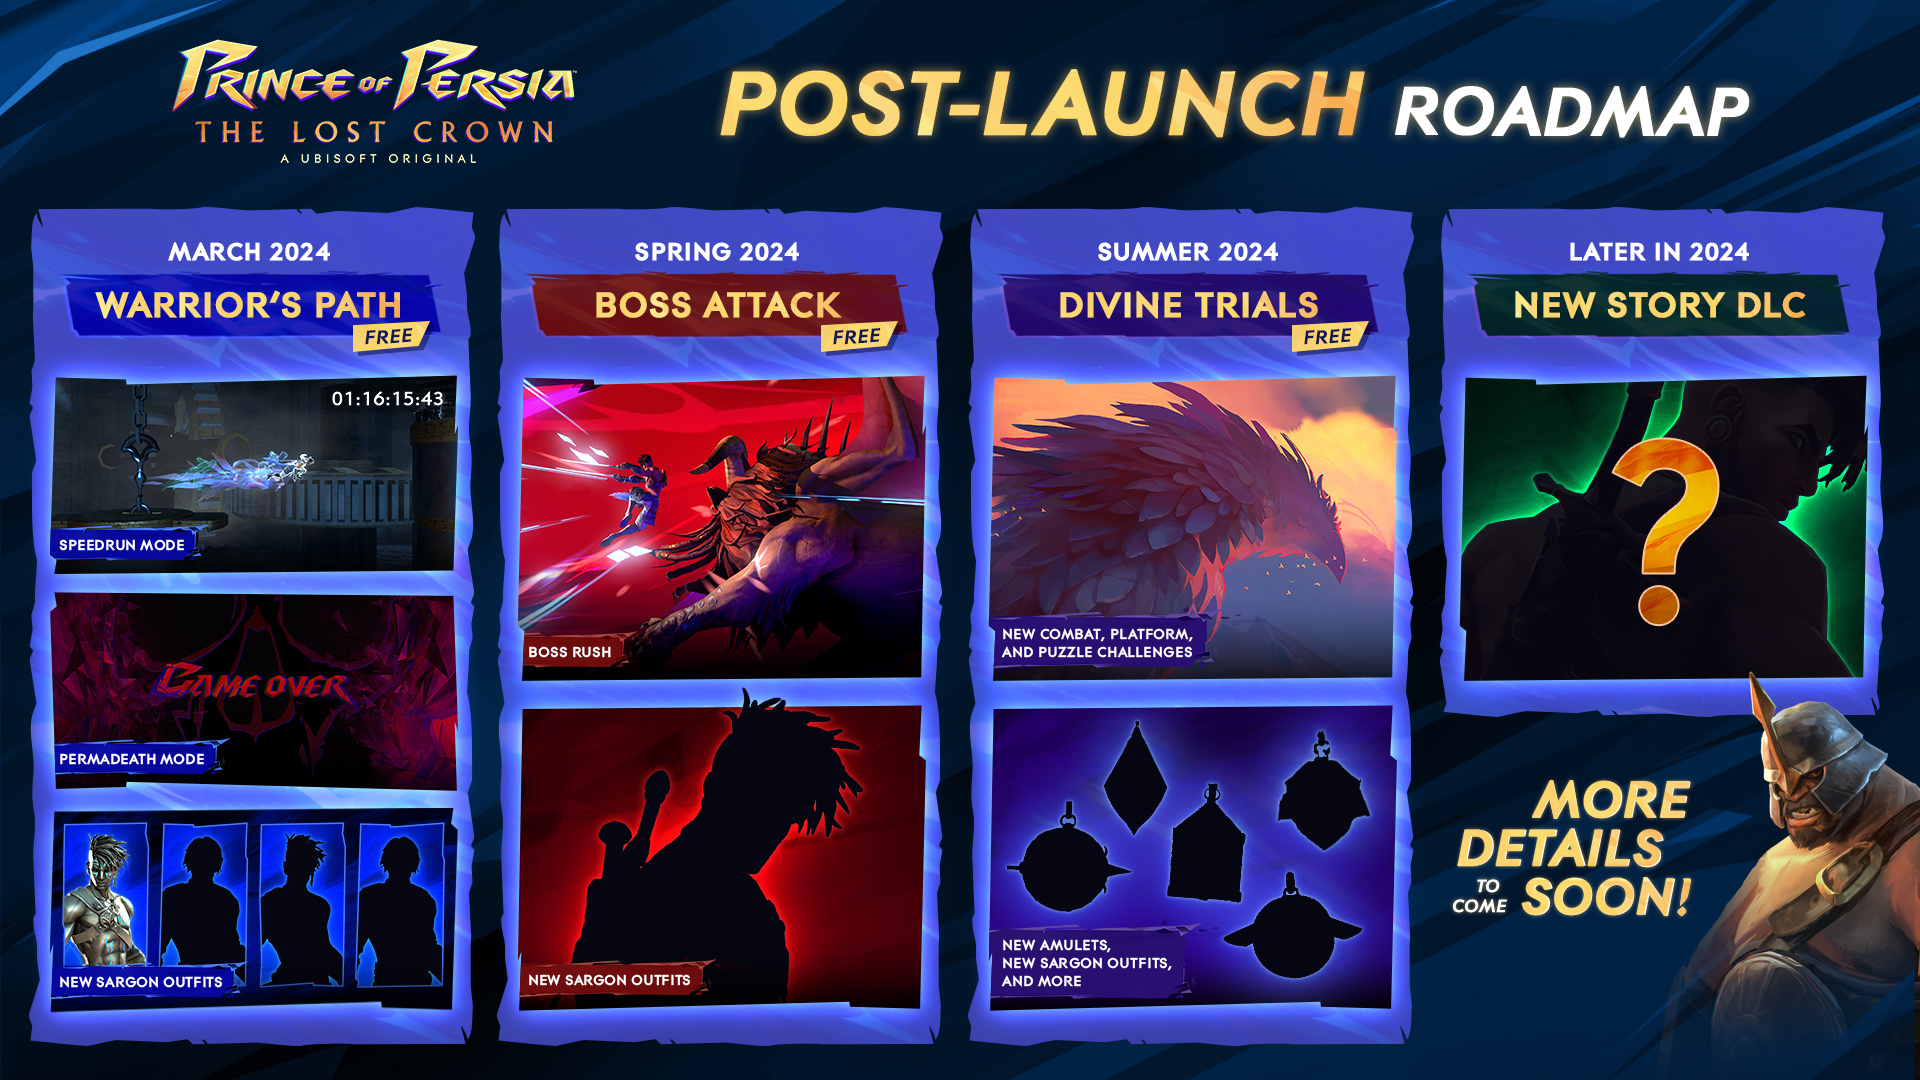 Prince of Persia: The Lost Crown Roadmap